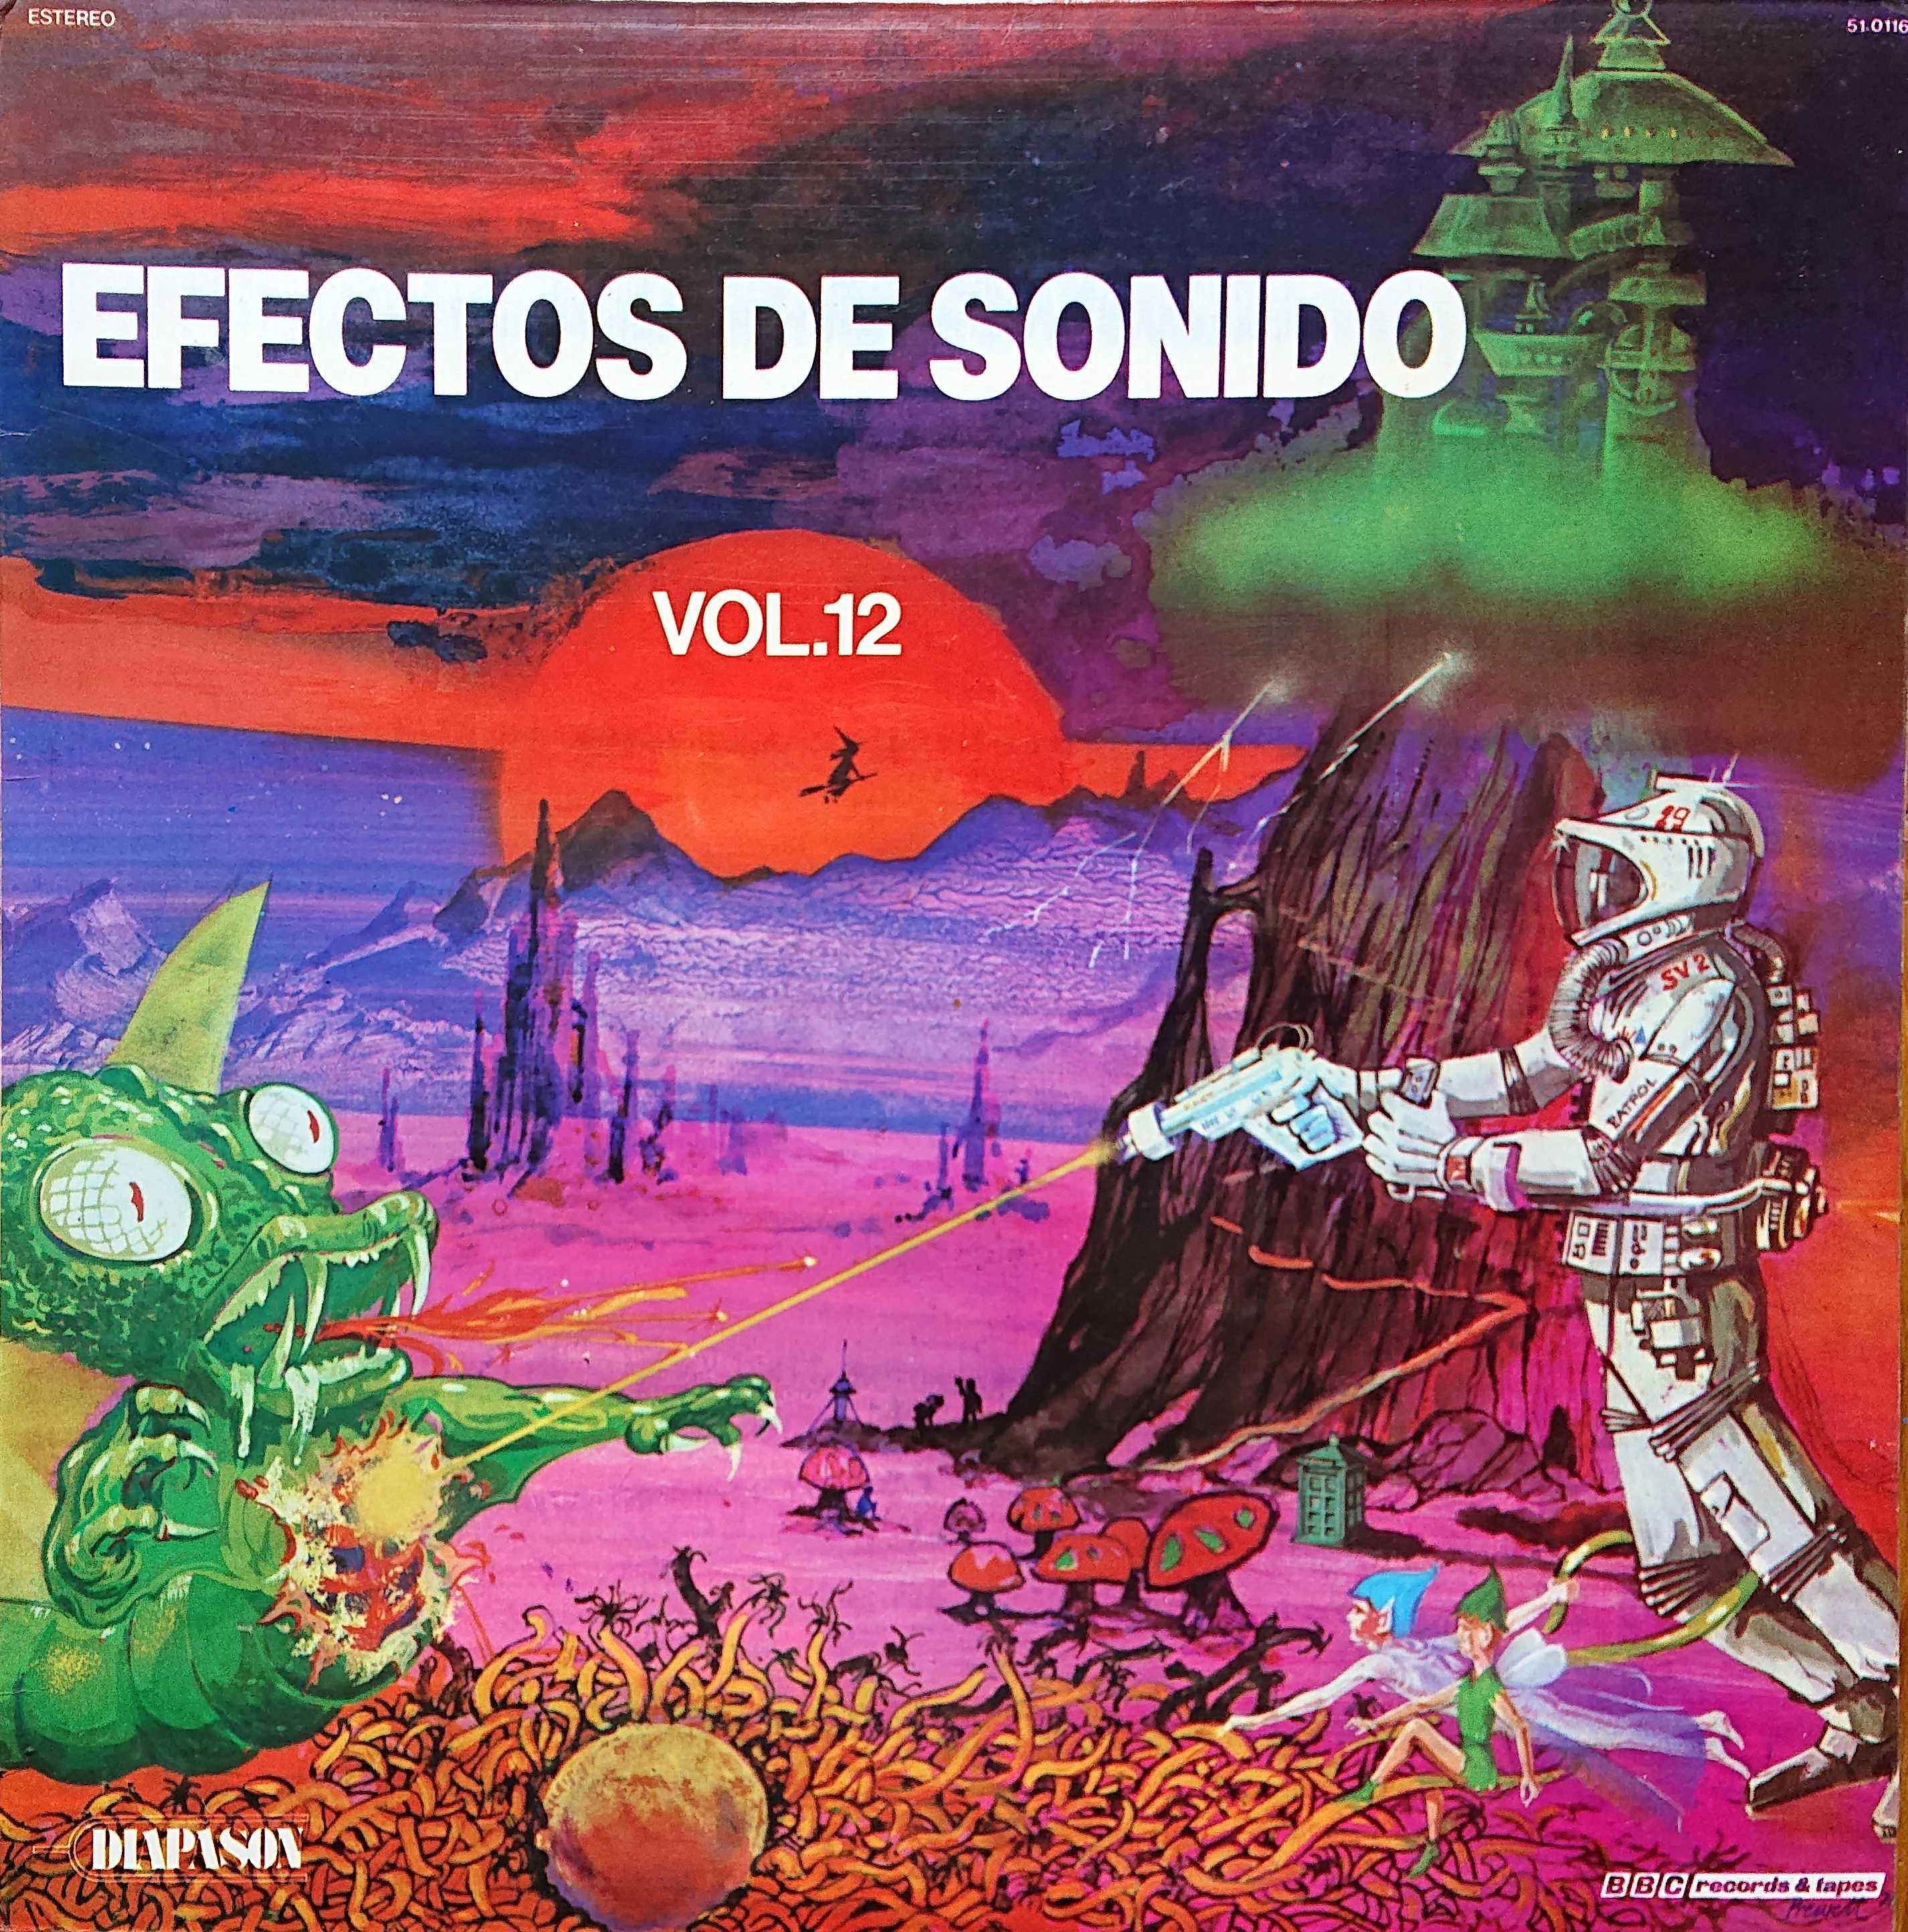 Picture of 51.0116 Efectos de sonido Vol 12 by artist Various / BBC Radiophonic Workshop from the BBC albums - Records and Tapes library